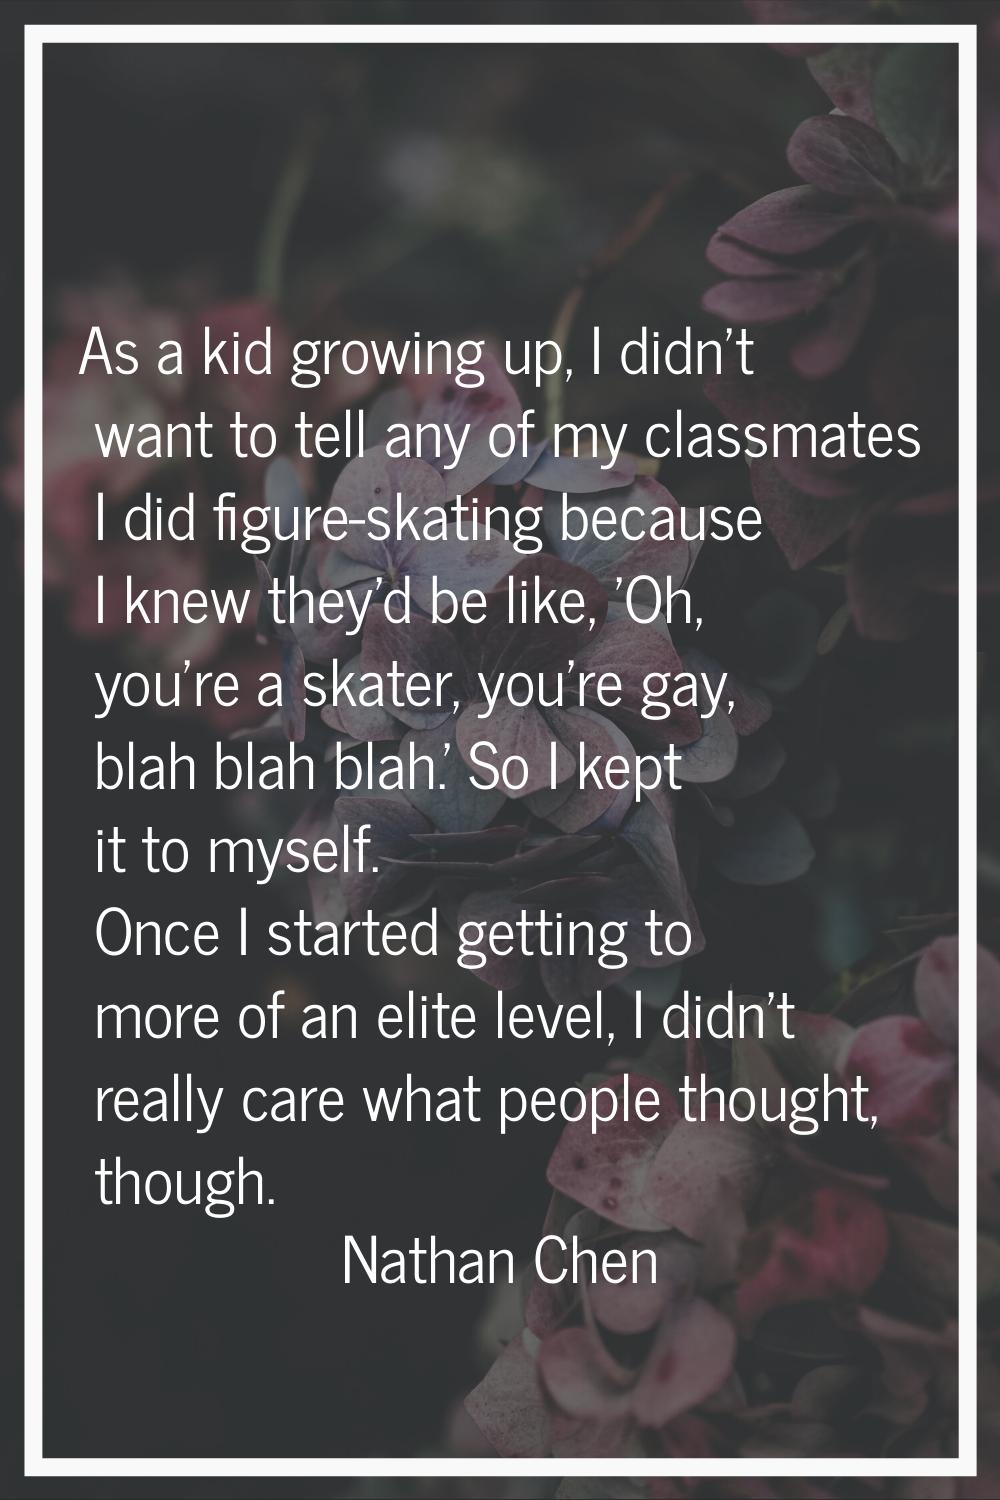 As a kid growing up, I didn't want to tell any of my classmates I did figure-skating because I knew